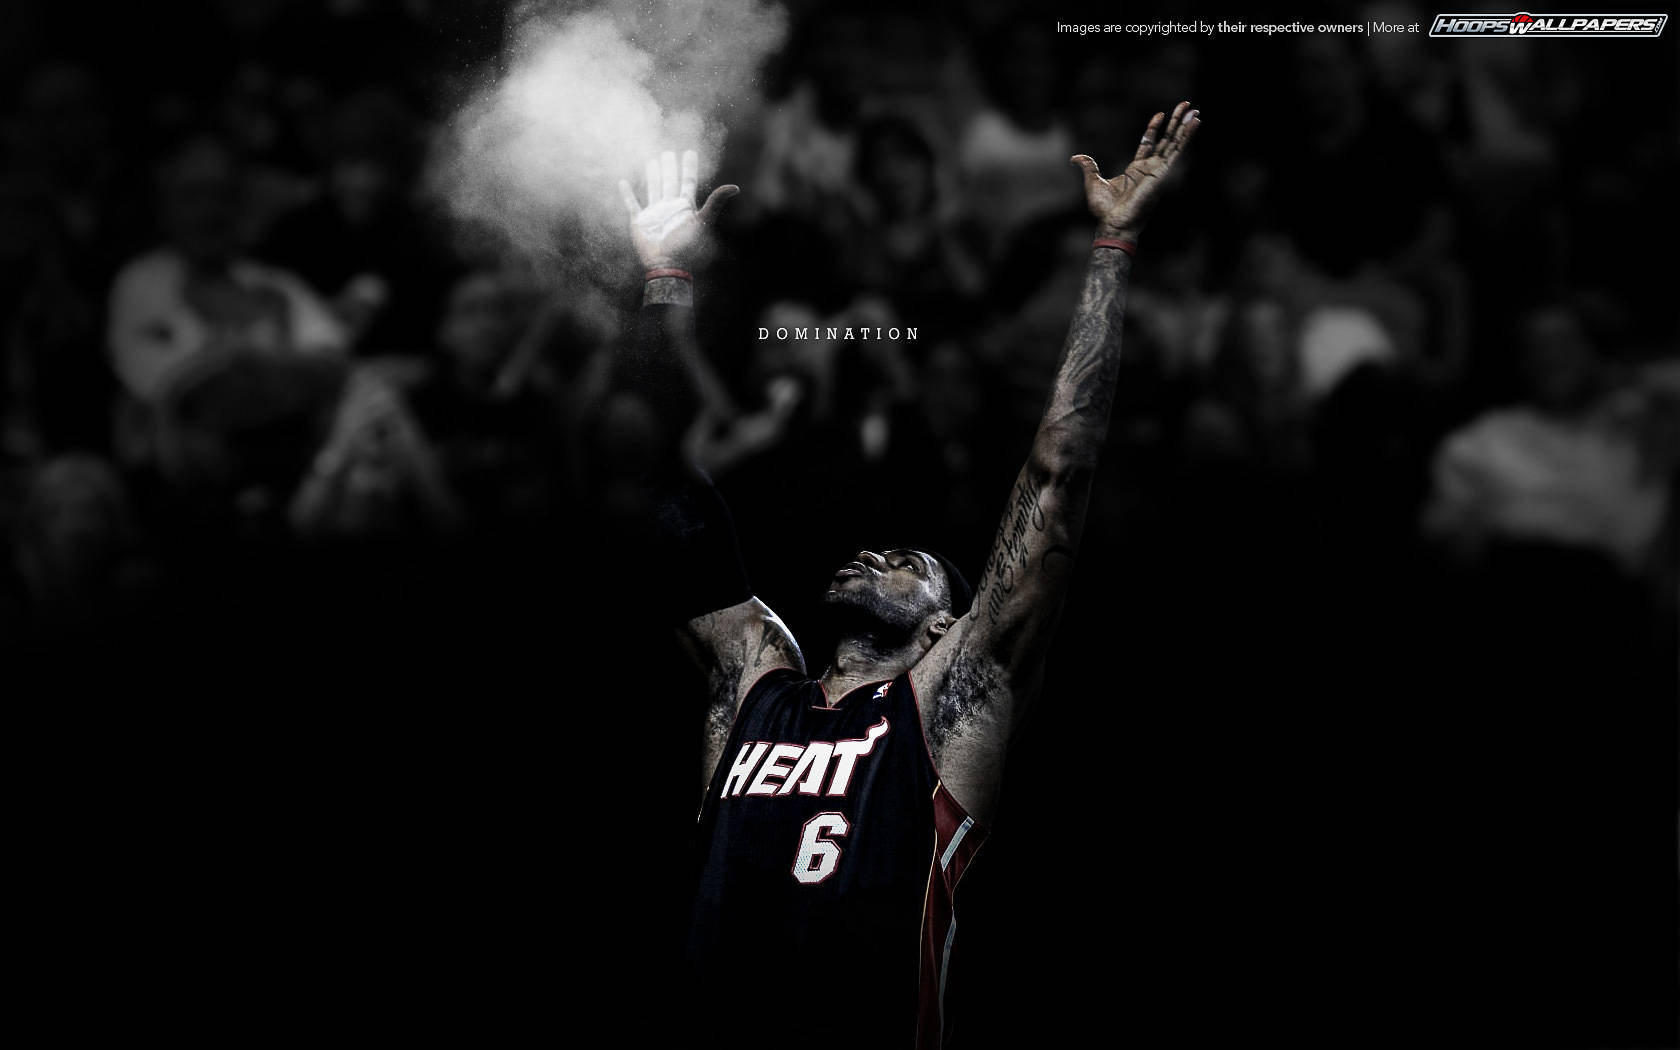 The Legacy Of LeBron James: His Miami Heat Jersey Number 6